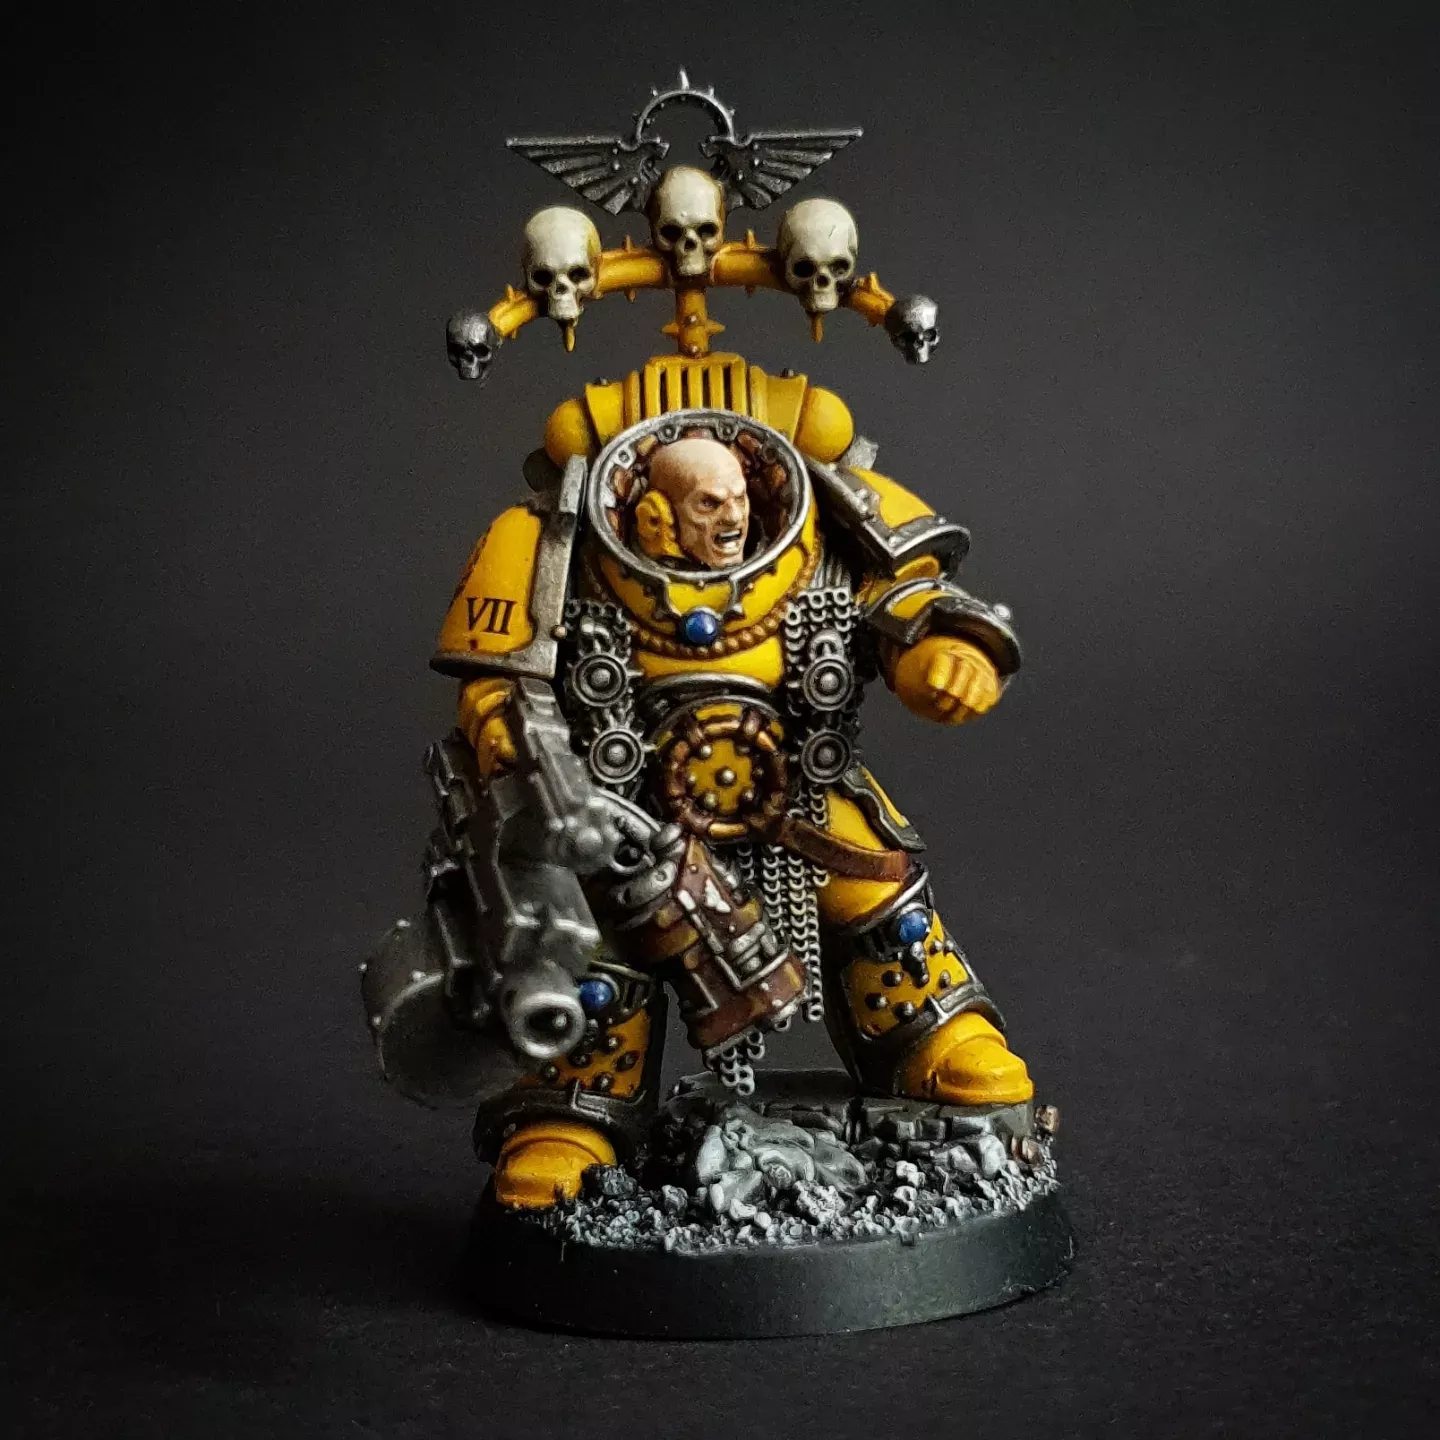 Imperial Fists Castellan with heavy bolter